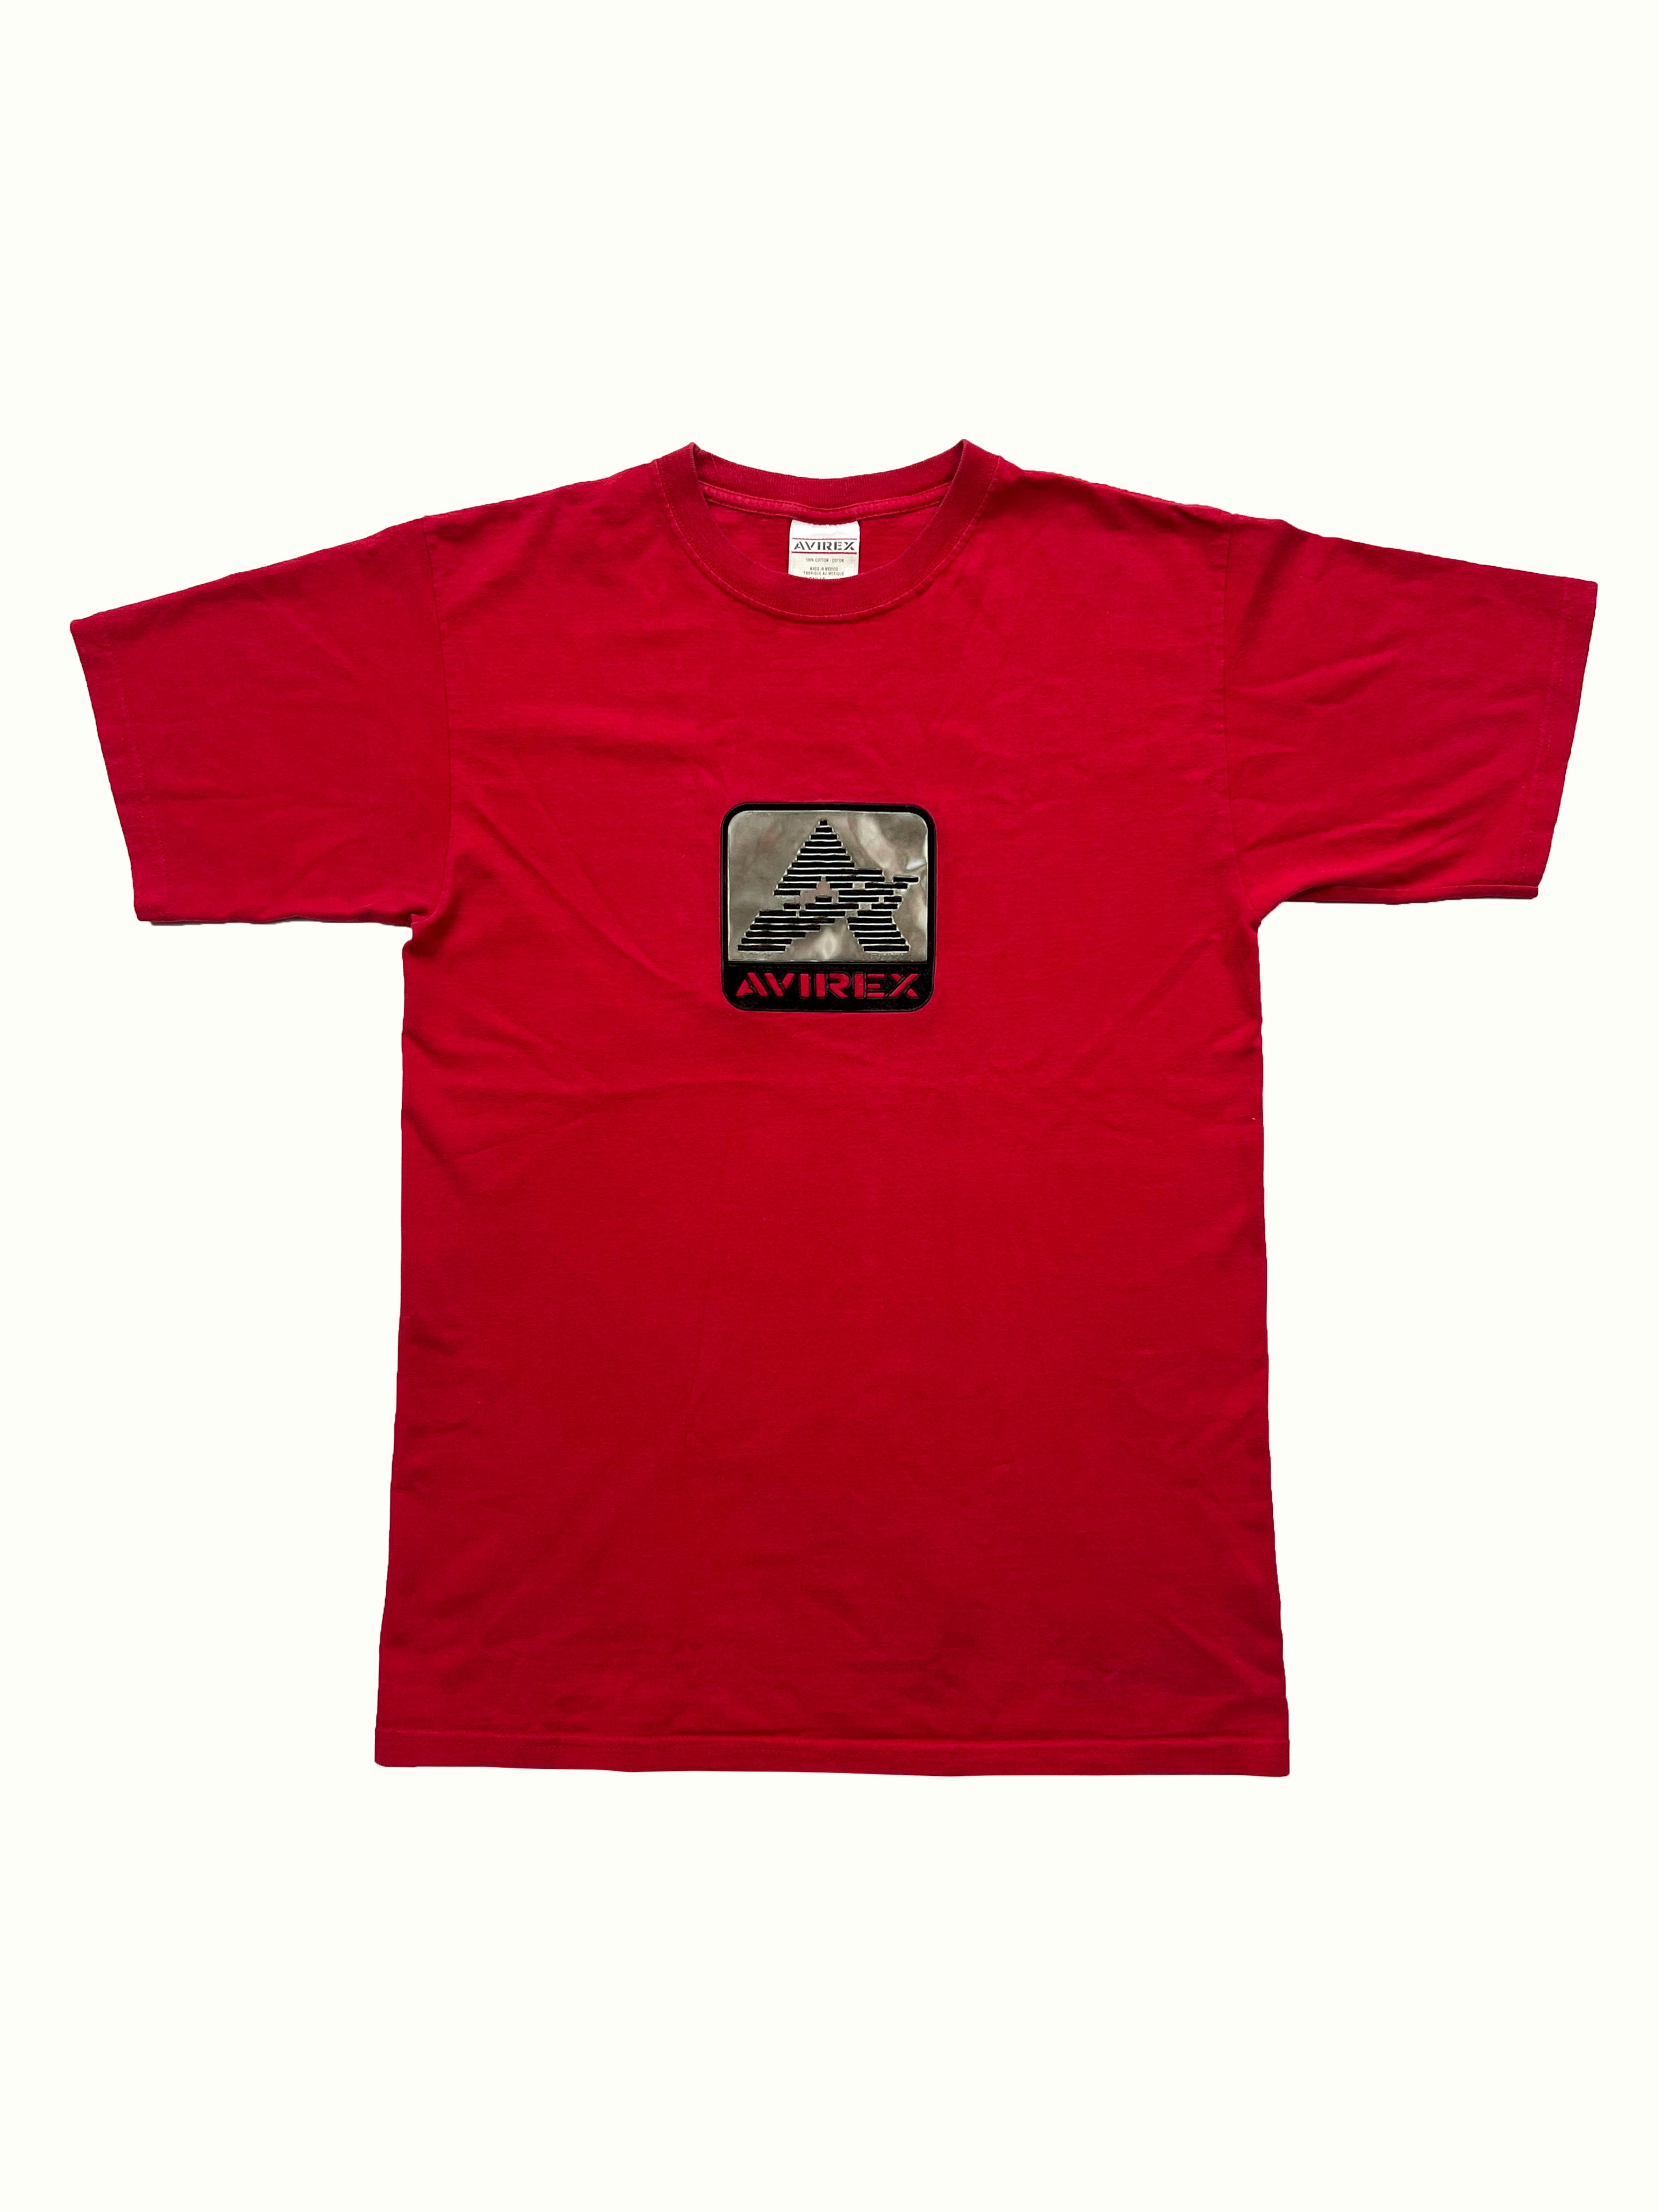 Avirex Red Spell Out T-shirt 90's